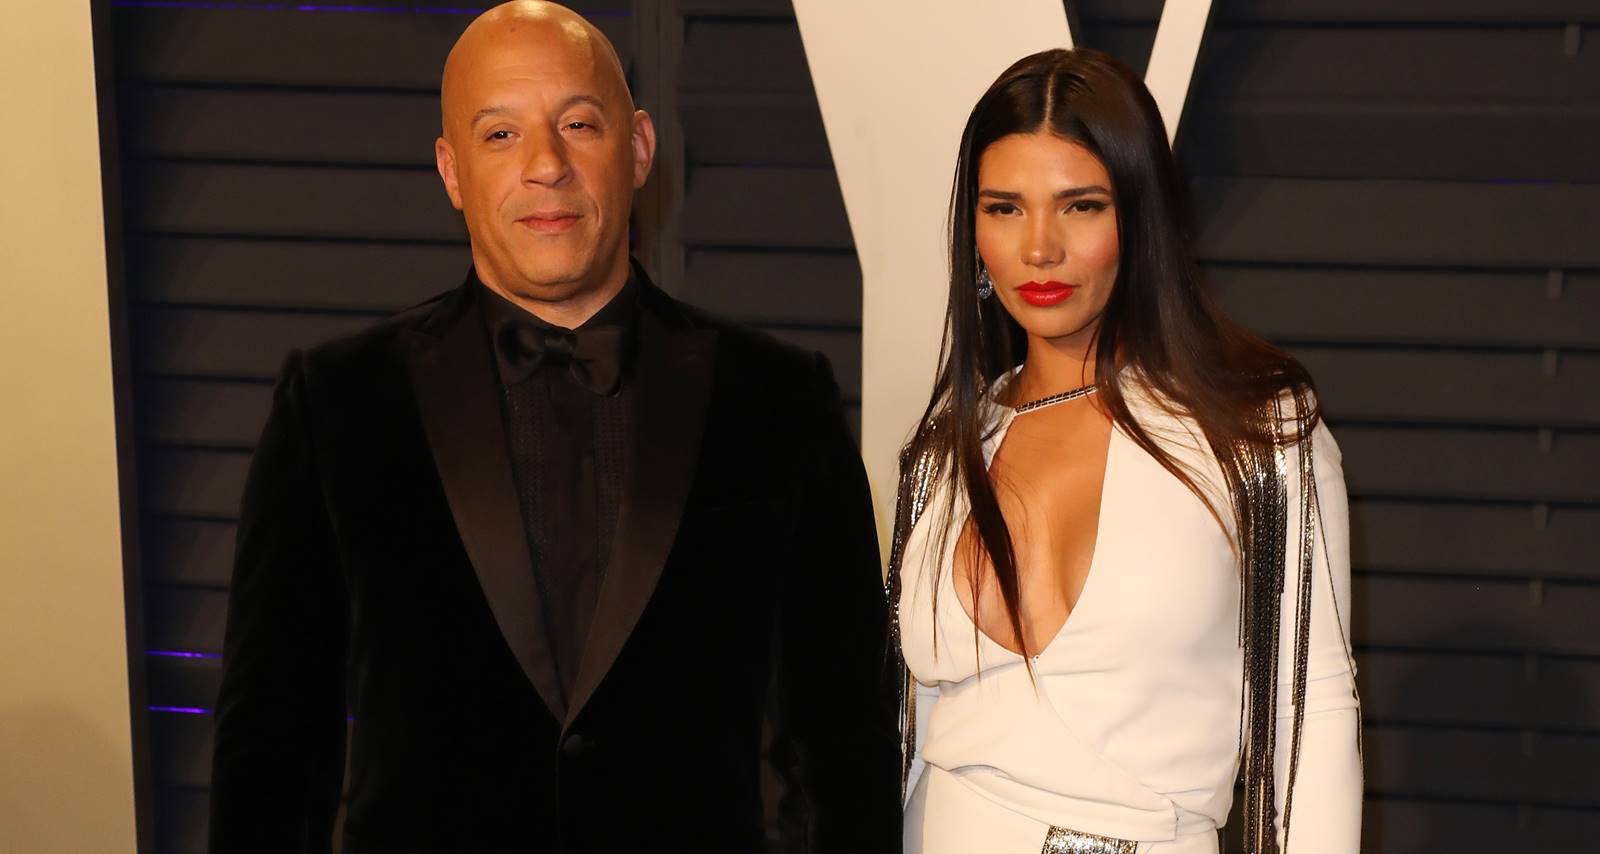 Paloma Jiménez Wiki, Age, Career, Kids and Facts About Vin Diesel’s Partner